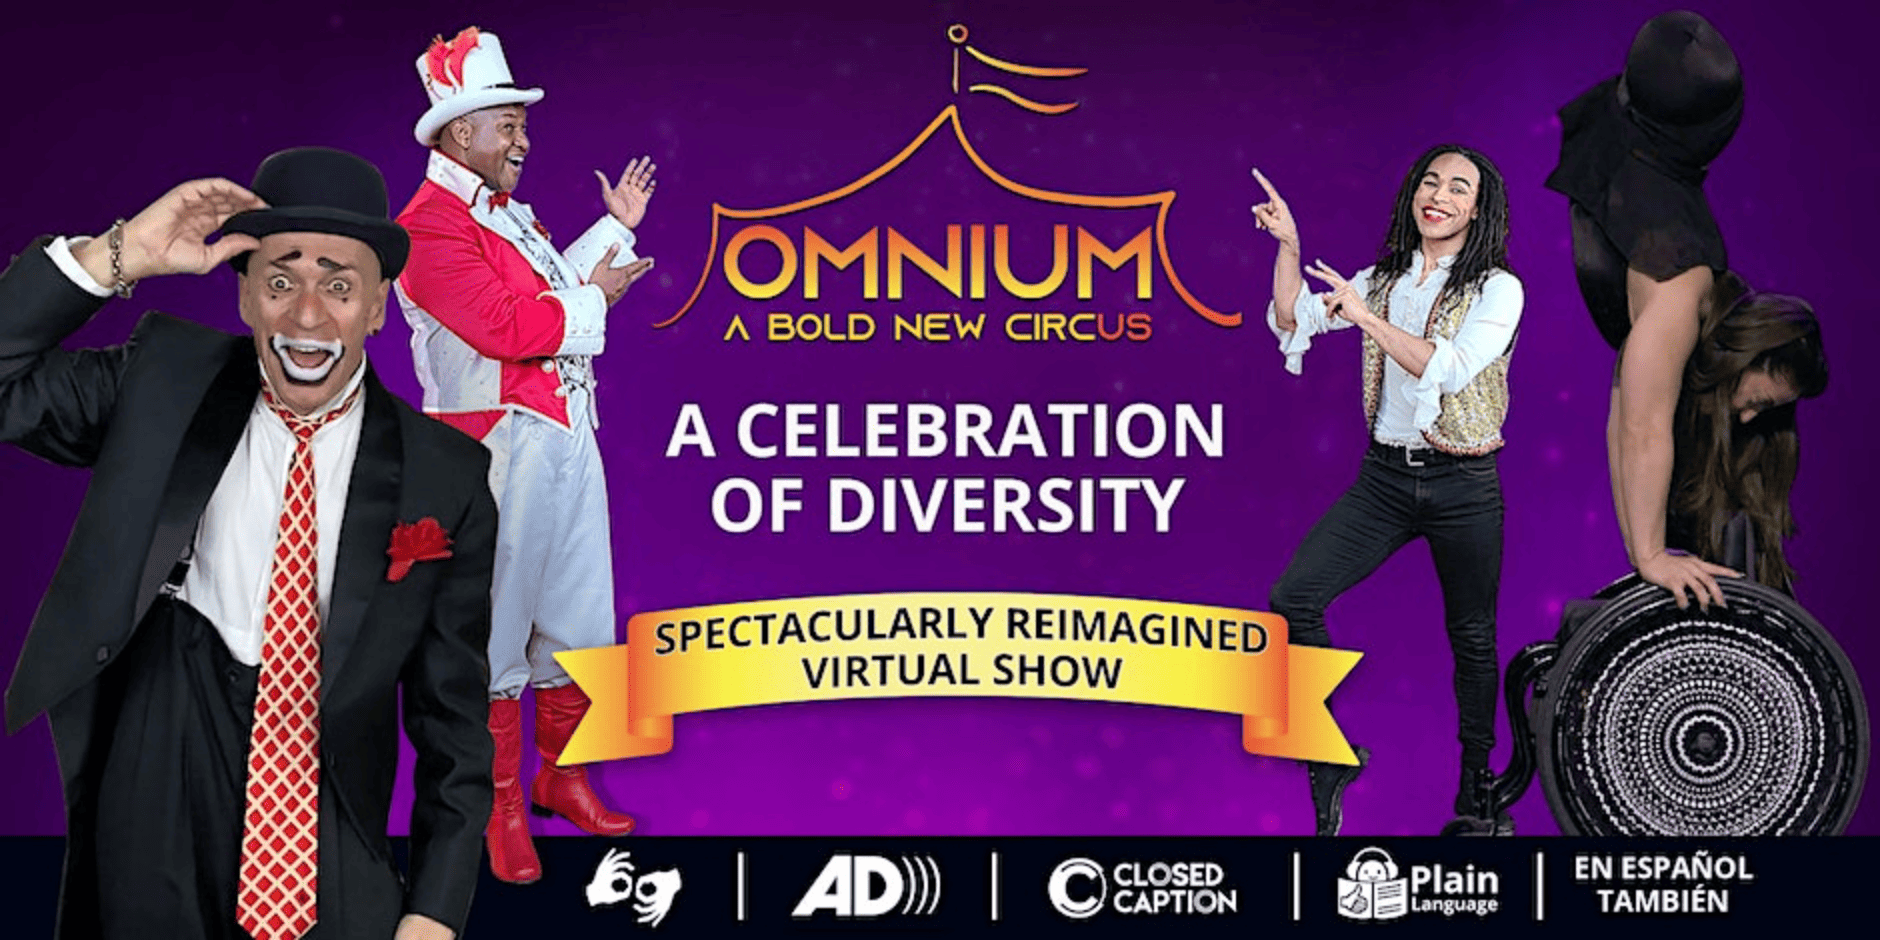 Banner: "A Celebration of Diversity: Spectacularly Reimagined Virtual Show"